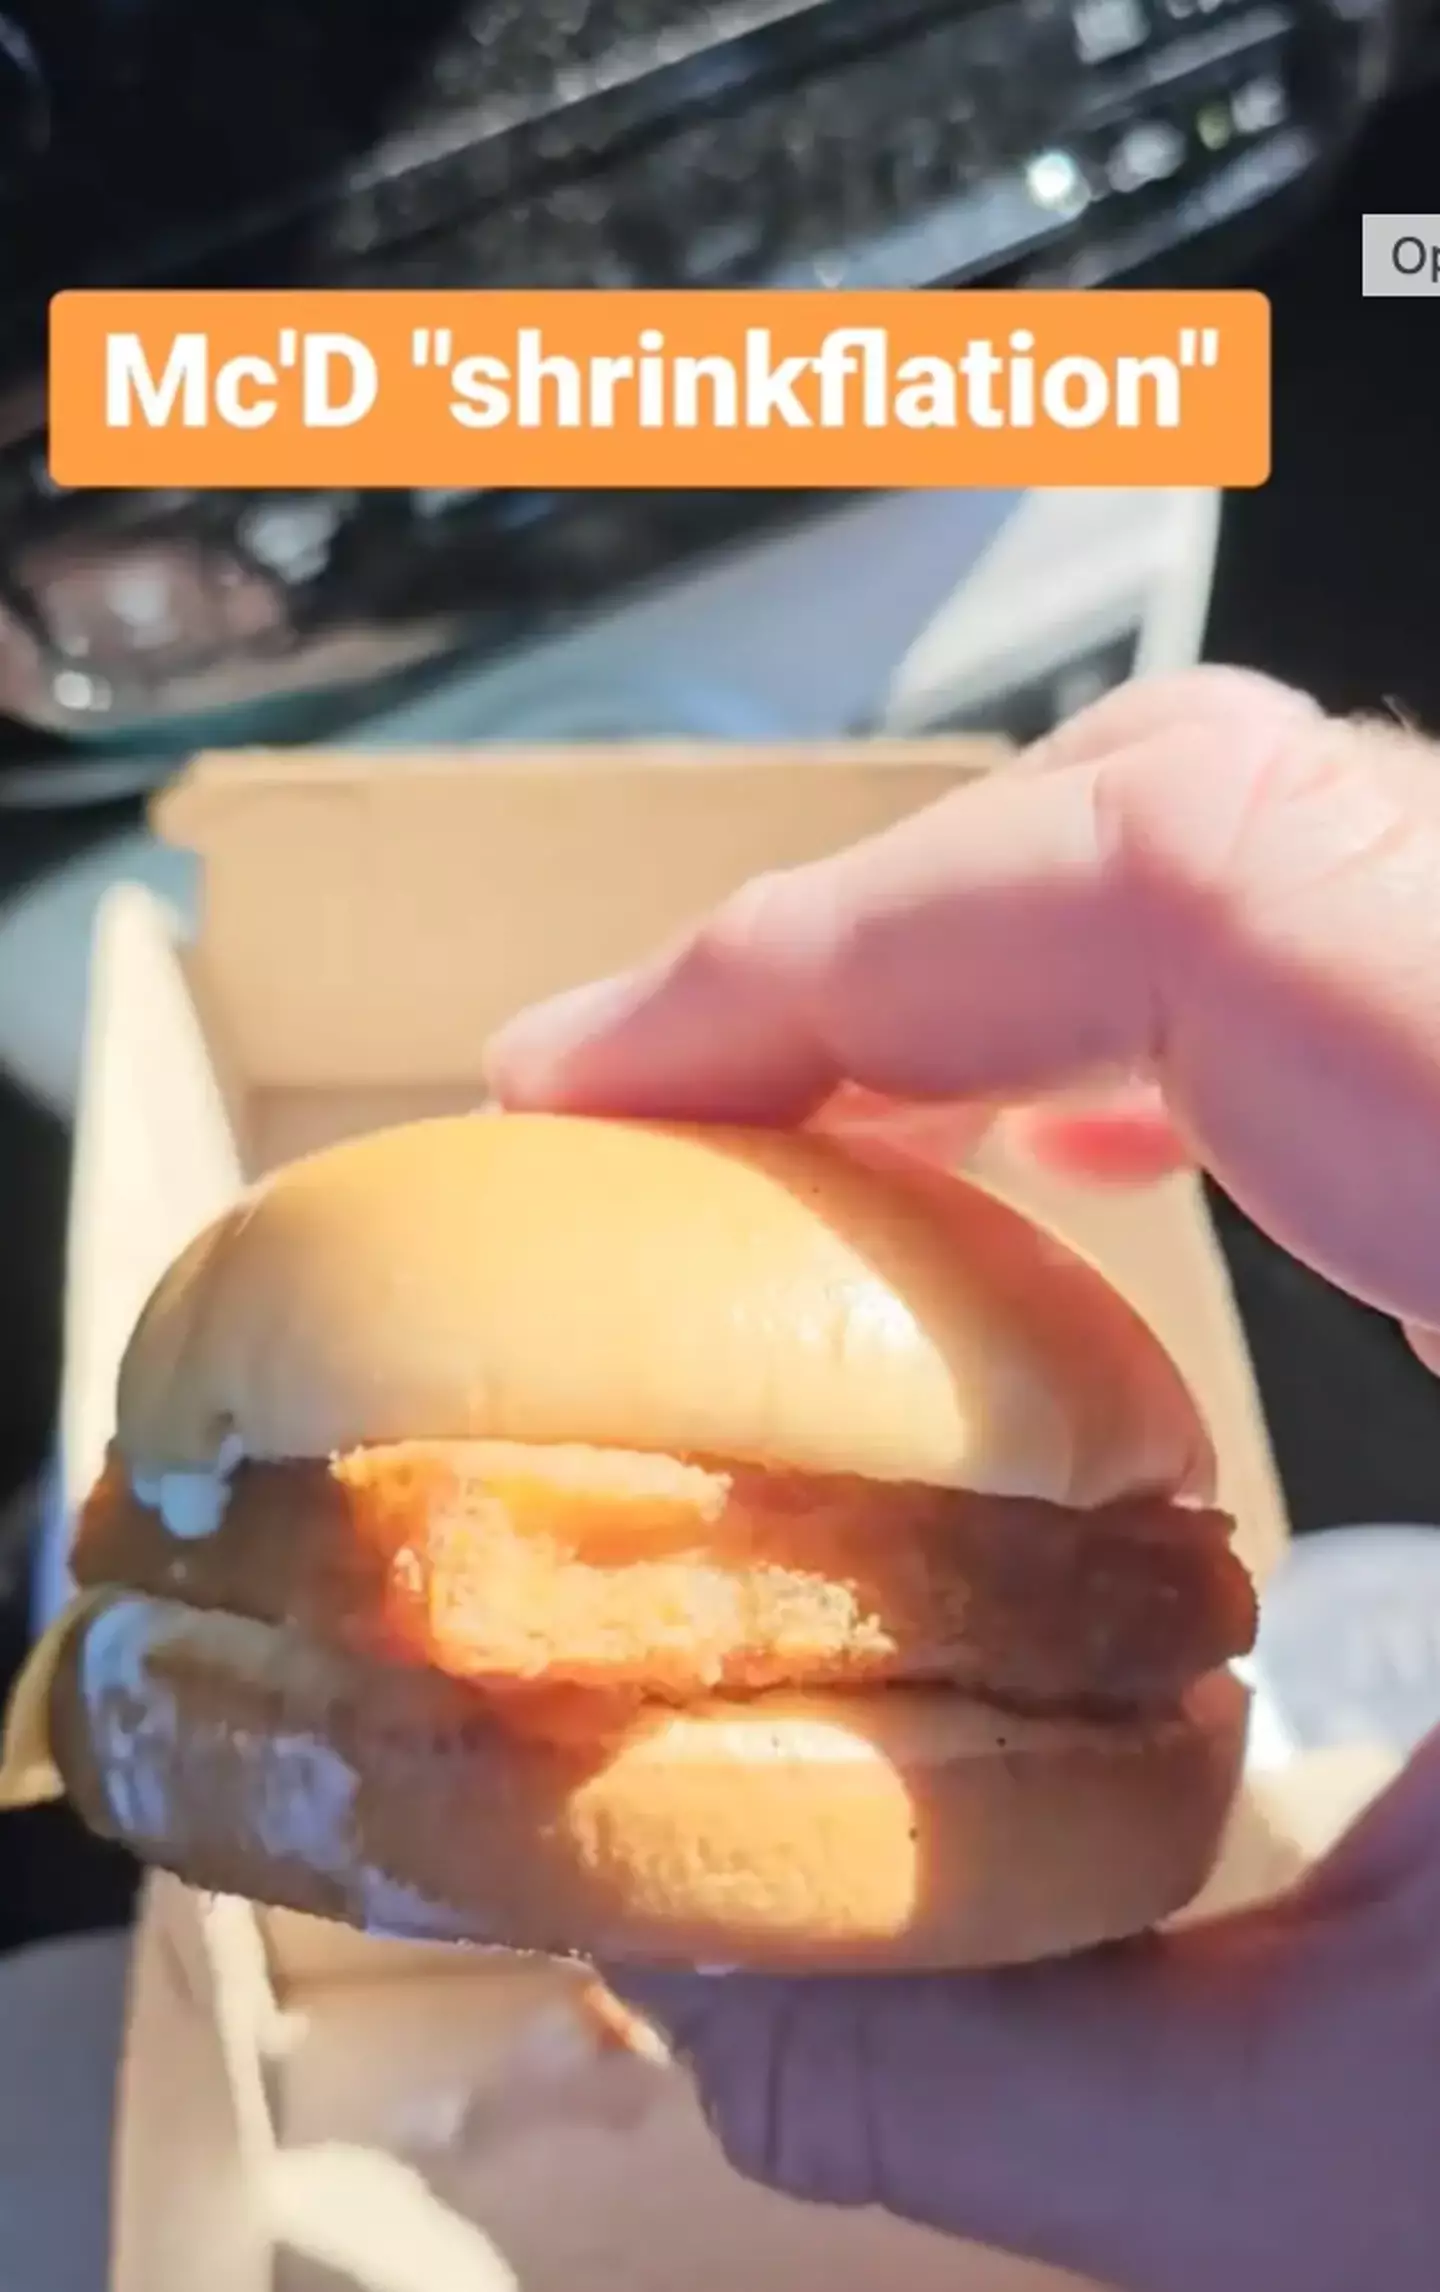 A McDonald's customer has claimed the burger appeared to be smaller.